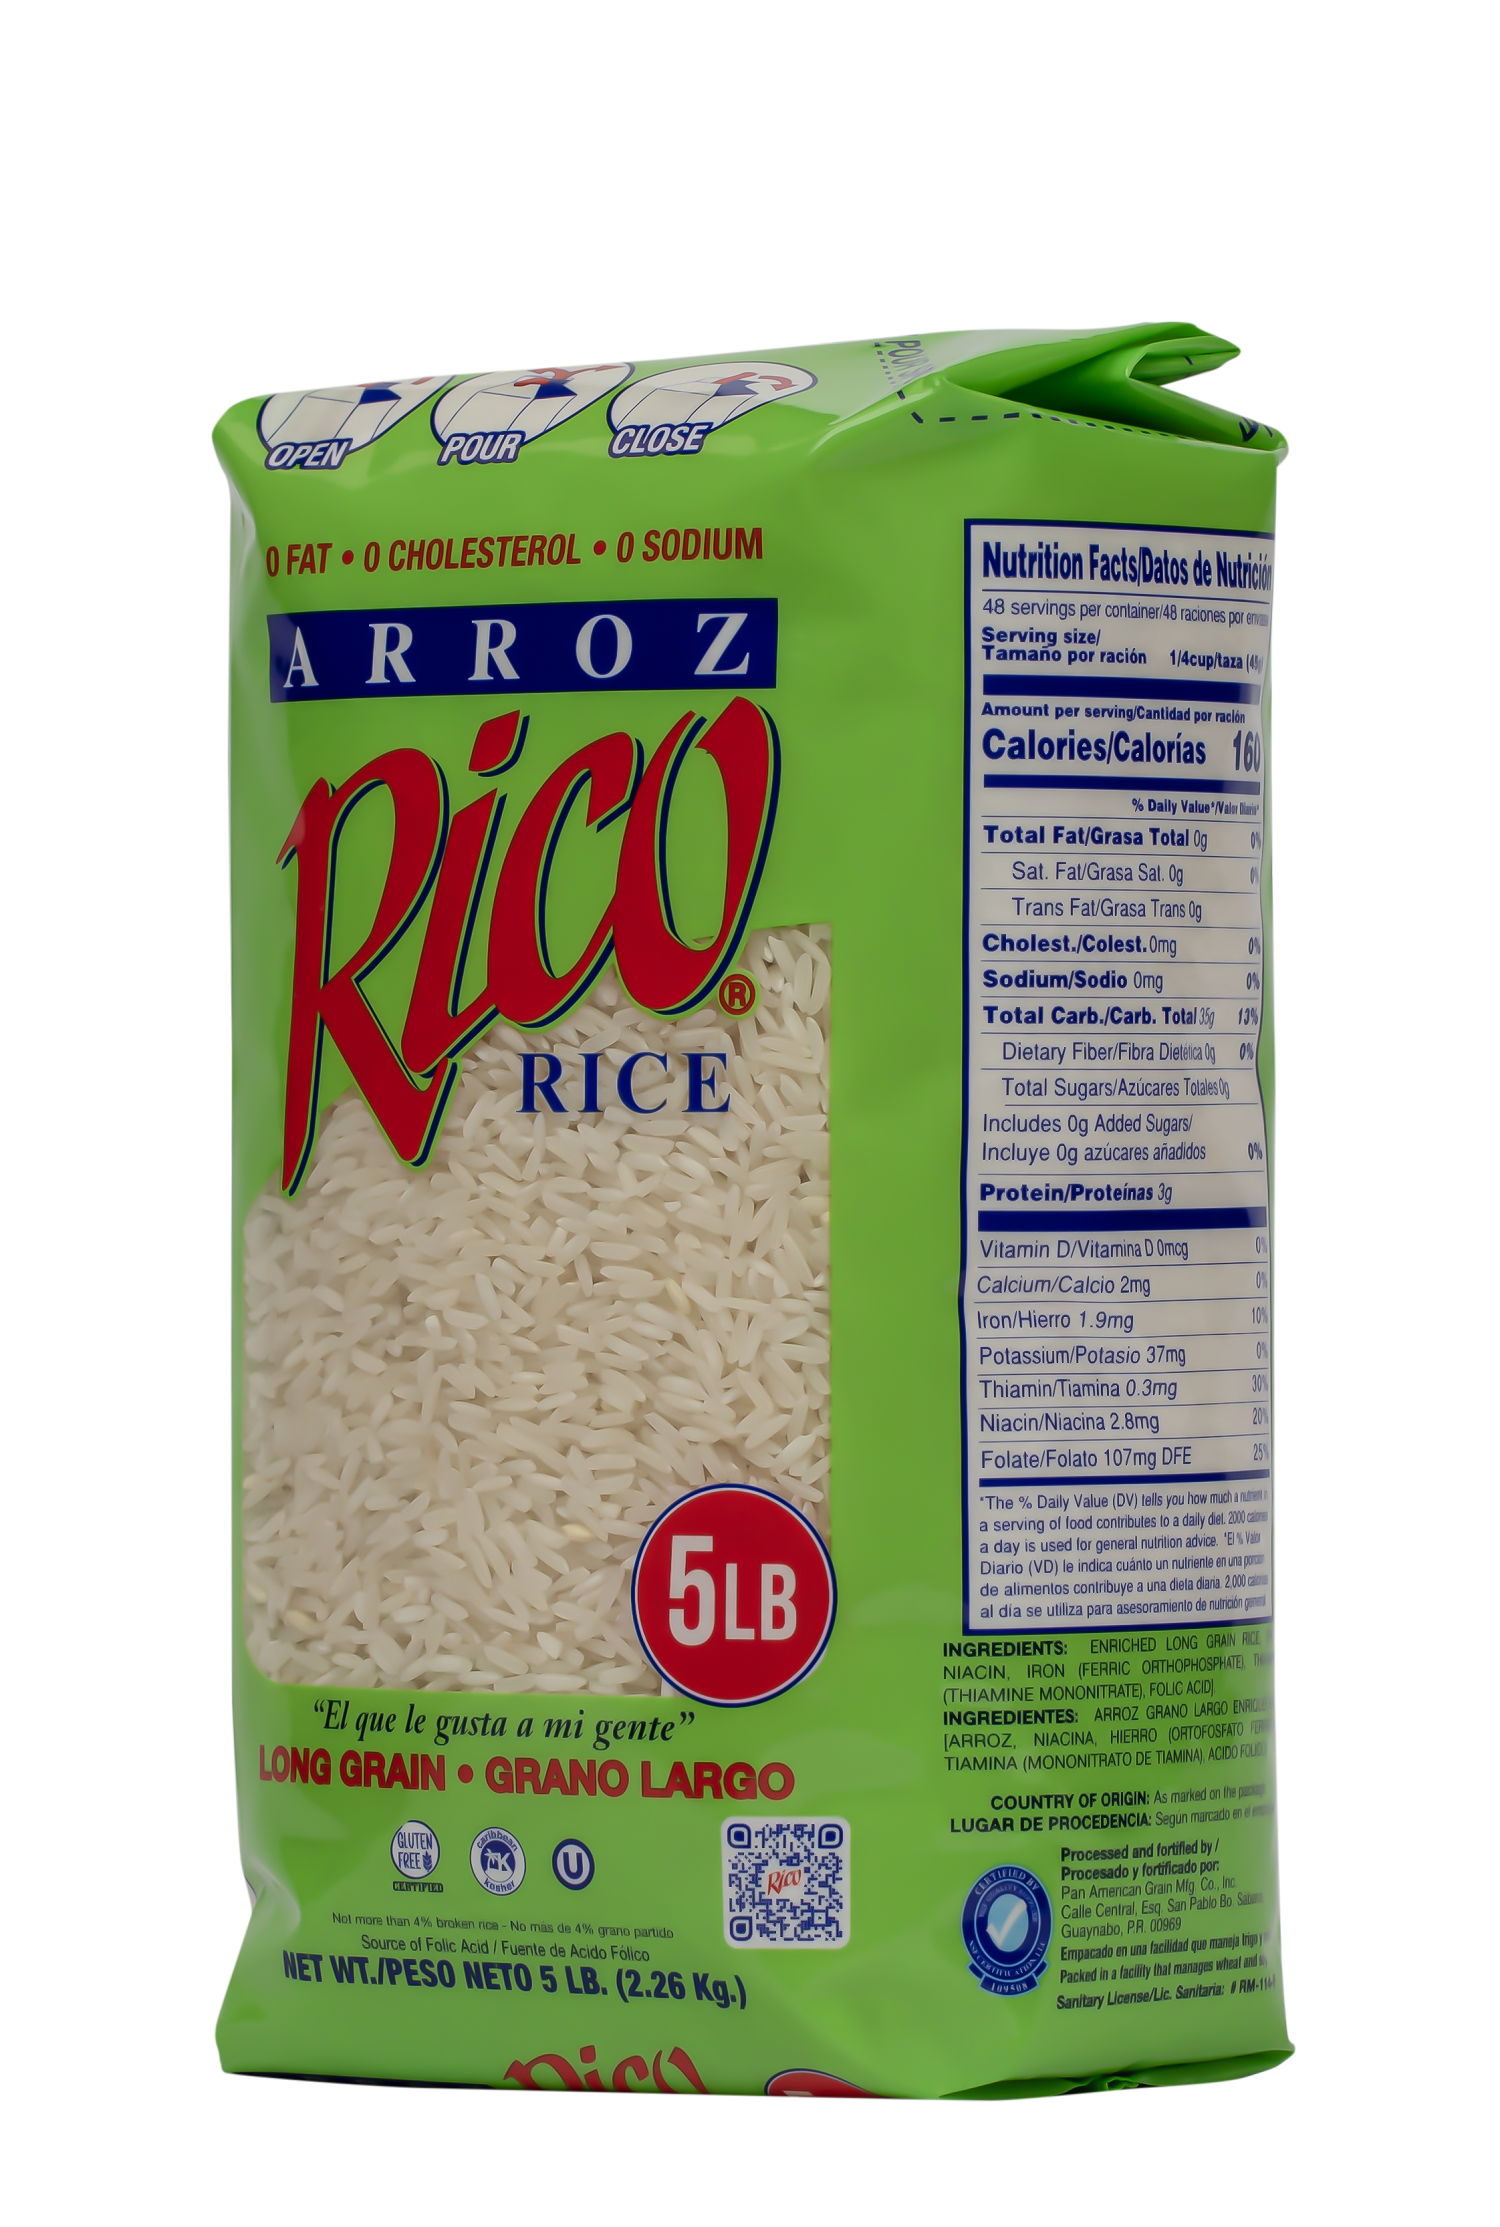 Rico Long Grain Rice 5 lb Gluten Free Made in Puerto Rico - image 2 of 8